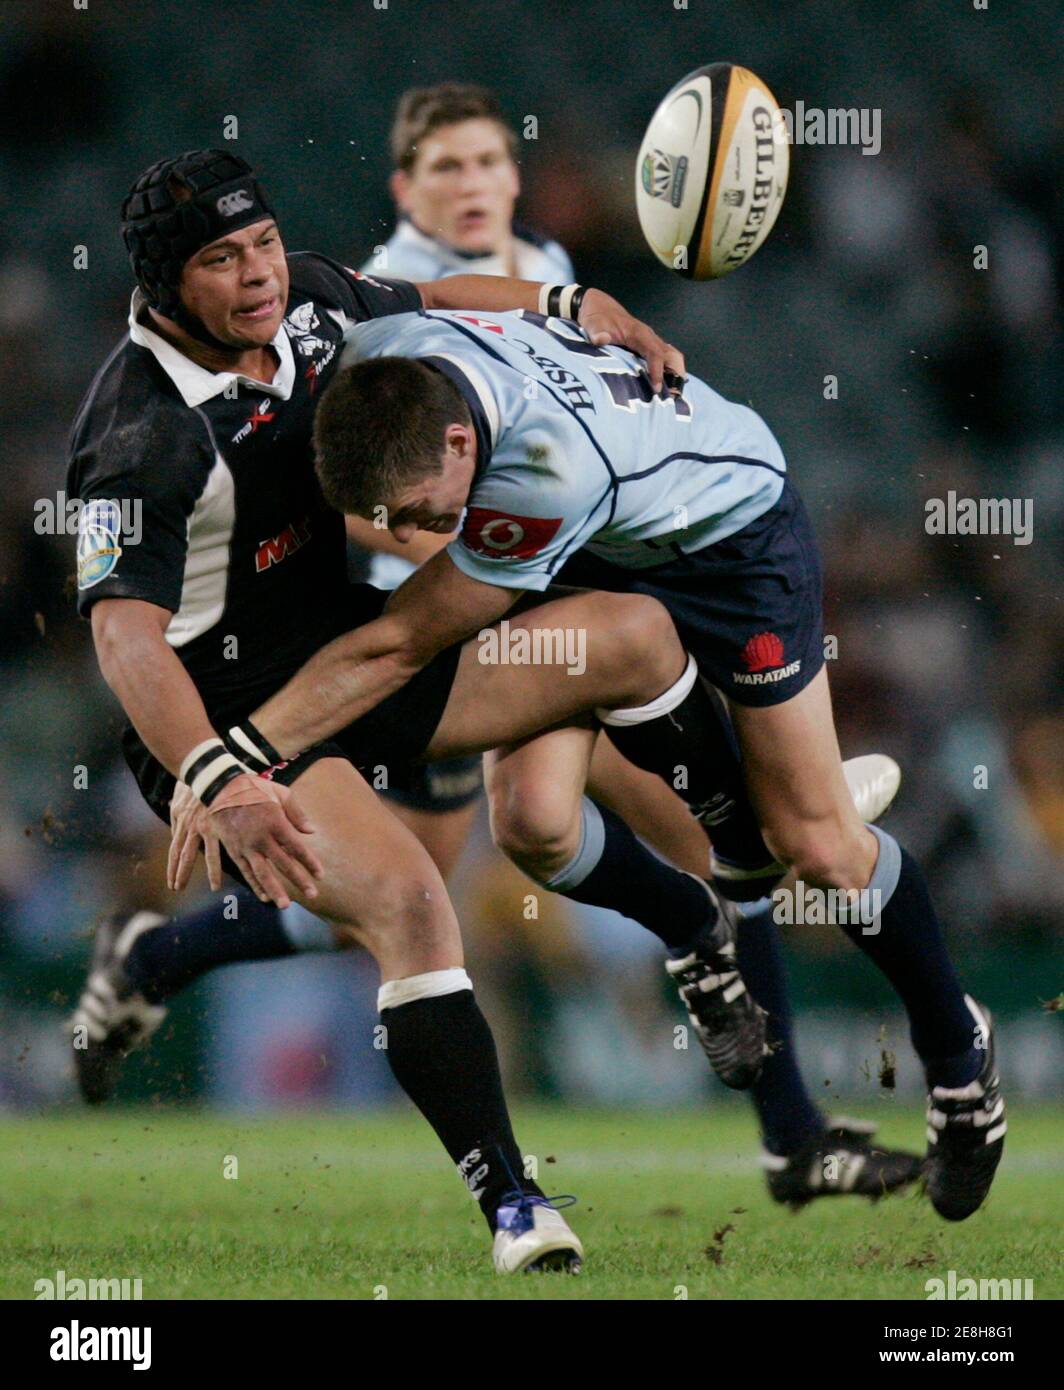 The ball comes loose as Rob Horne of the Waratahs from Australia (L) tackles Adrian Jacobs of the Sharks from South Africa (R) during their Super 14 semi-final rugby match in Sydney May 24, 2008. REUTERS/Will Burgess (AUSTRALIA) Stock Photo